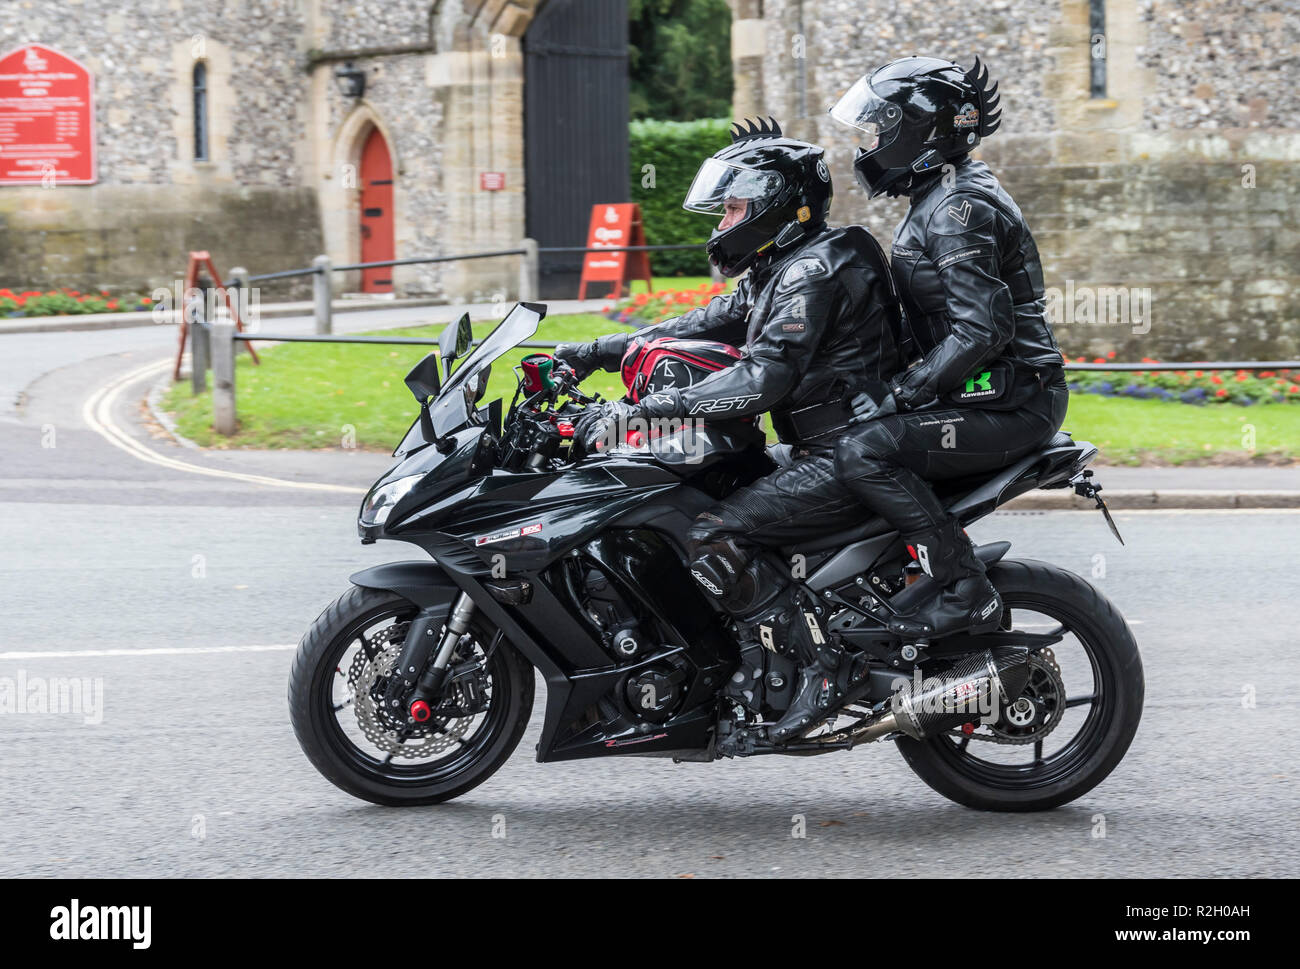 Man riding Kawasaki Z1000SX motorcycle with female pillion passenger in black leathers & protective clothing, in the UK. Stock Photo